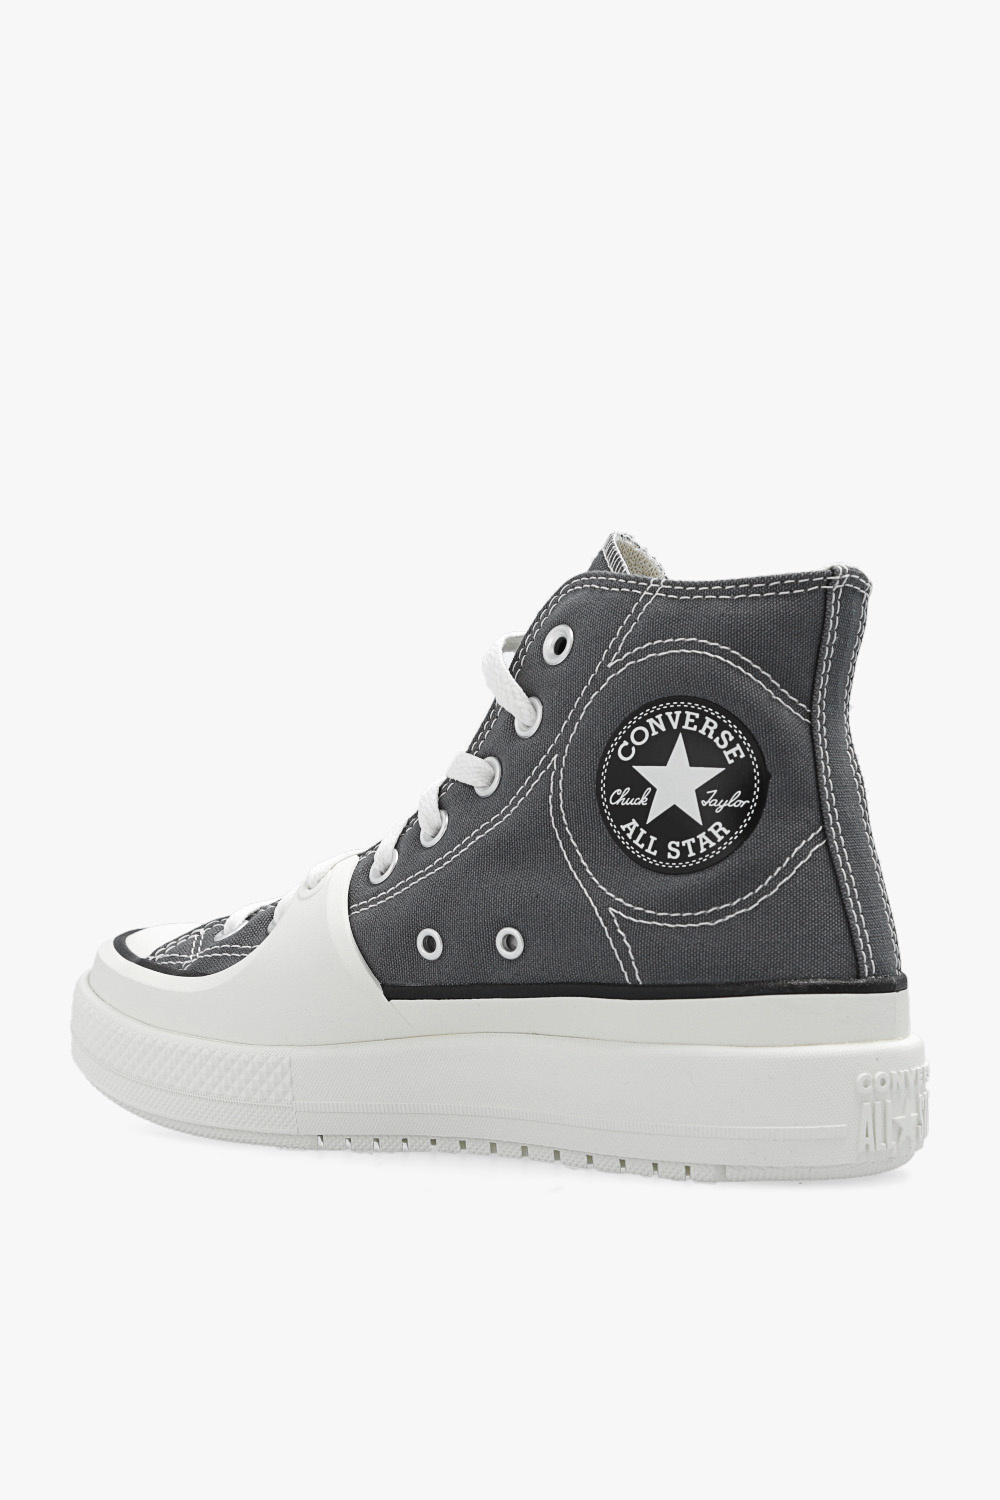 Converse 'CHUCK TAYLOR ALL STAR | InteragencyboardShops | Converse Chuck Taylor All x Nike Flyknit | Women's Shoes